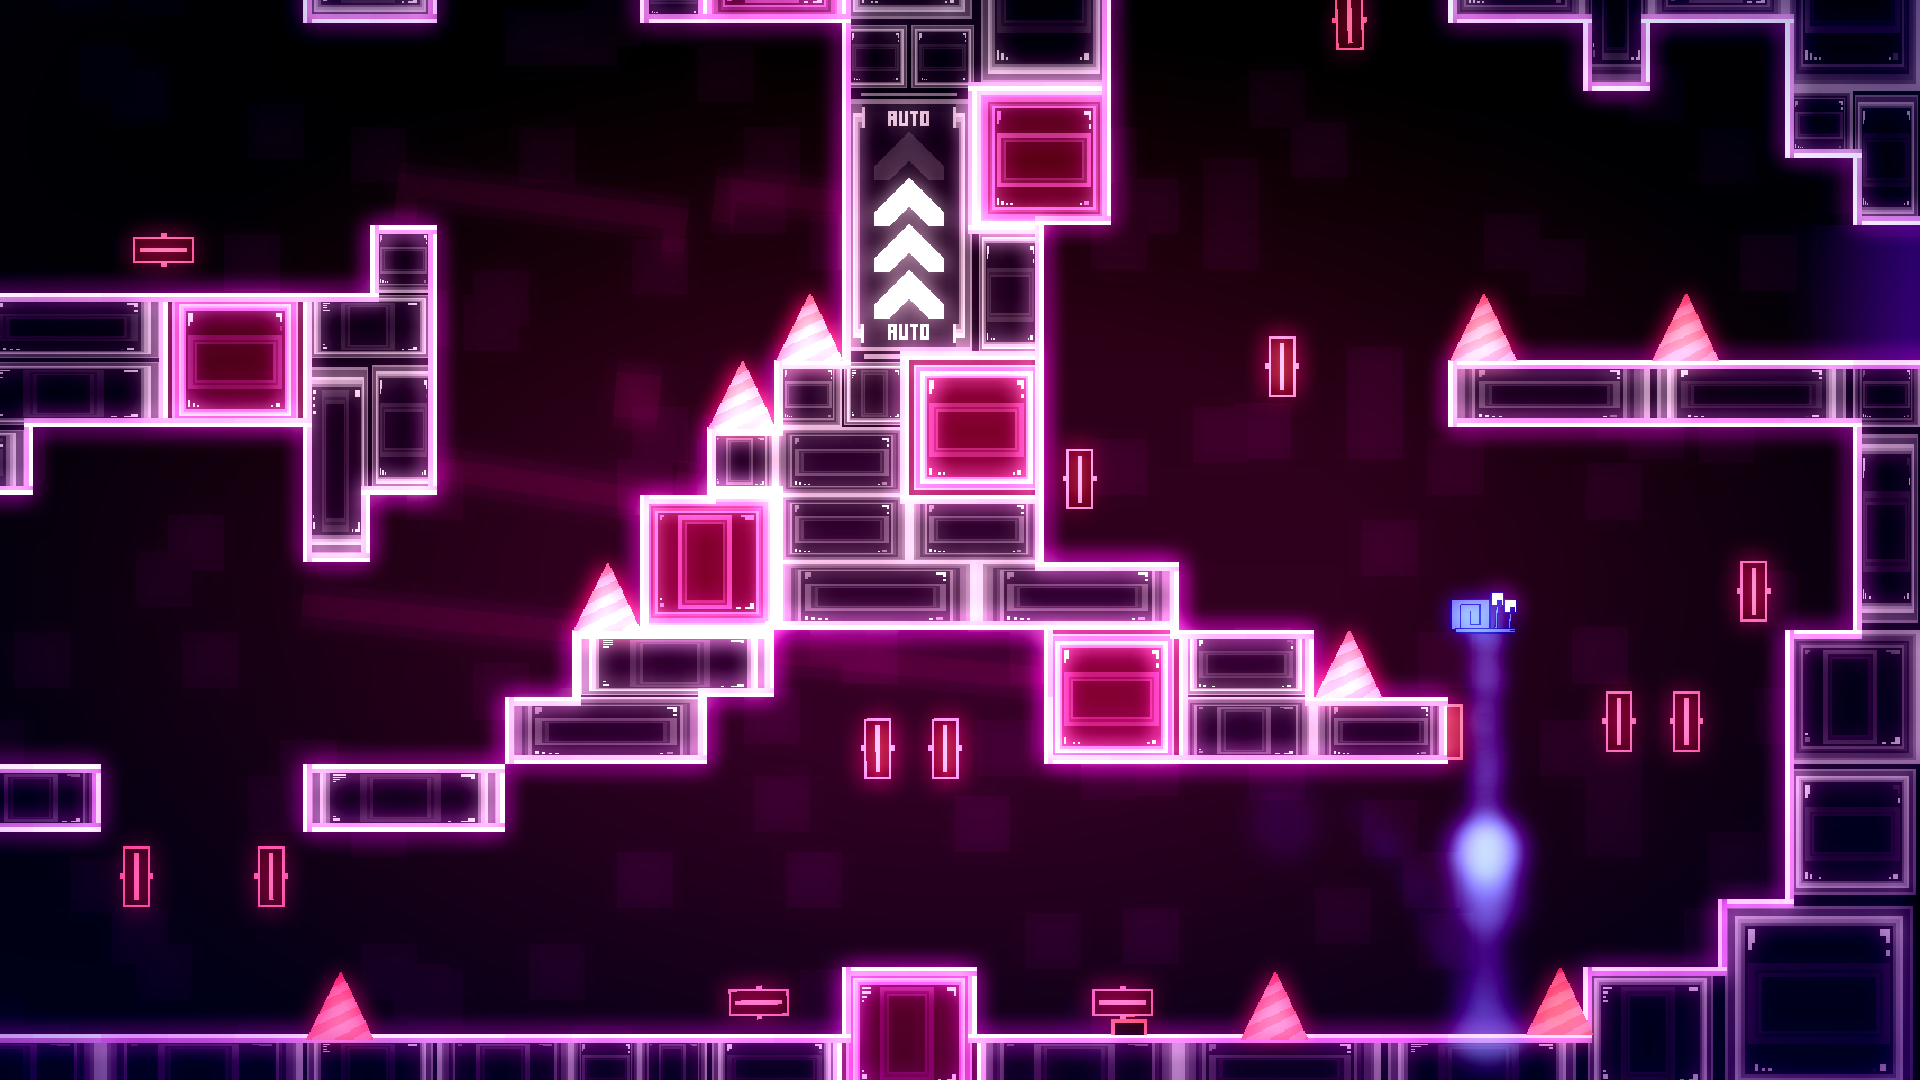 Fast-paced precision platforming